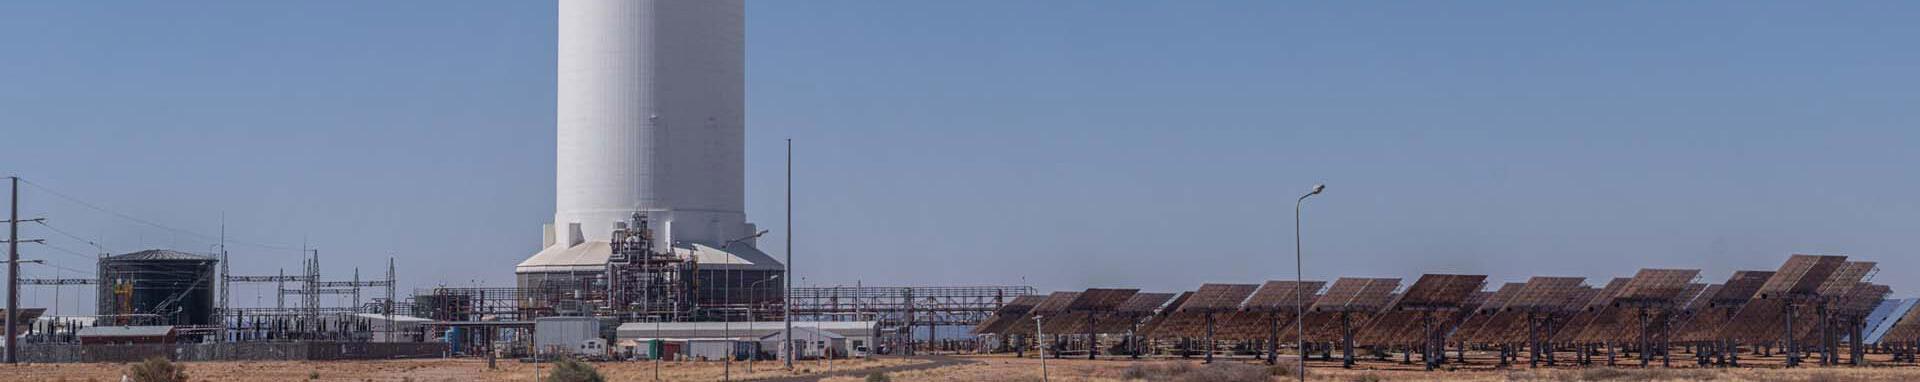 CIF Action Khi Solar One, Concentrated Solar Plant, Northern Cape, South Africa